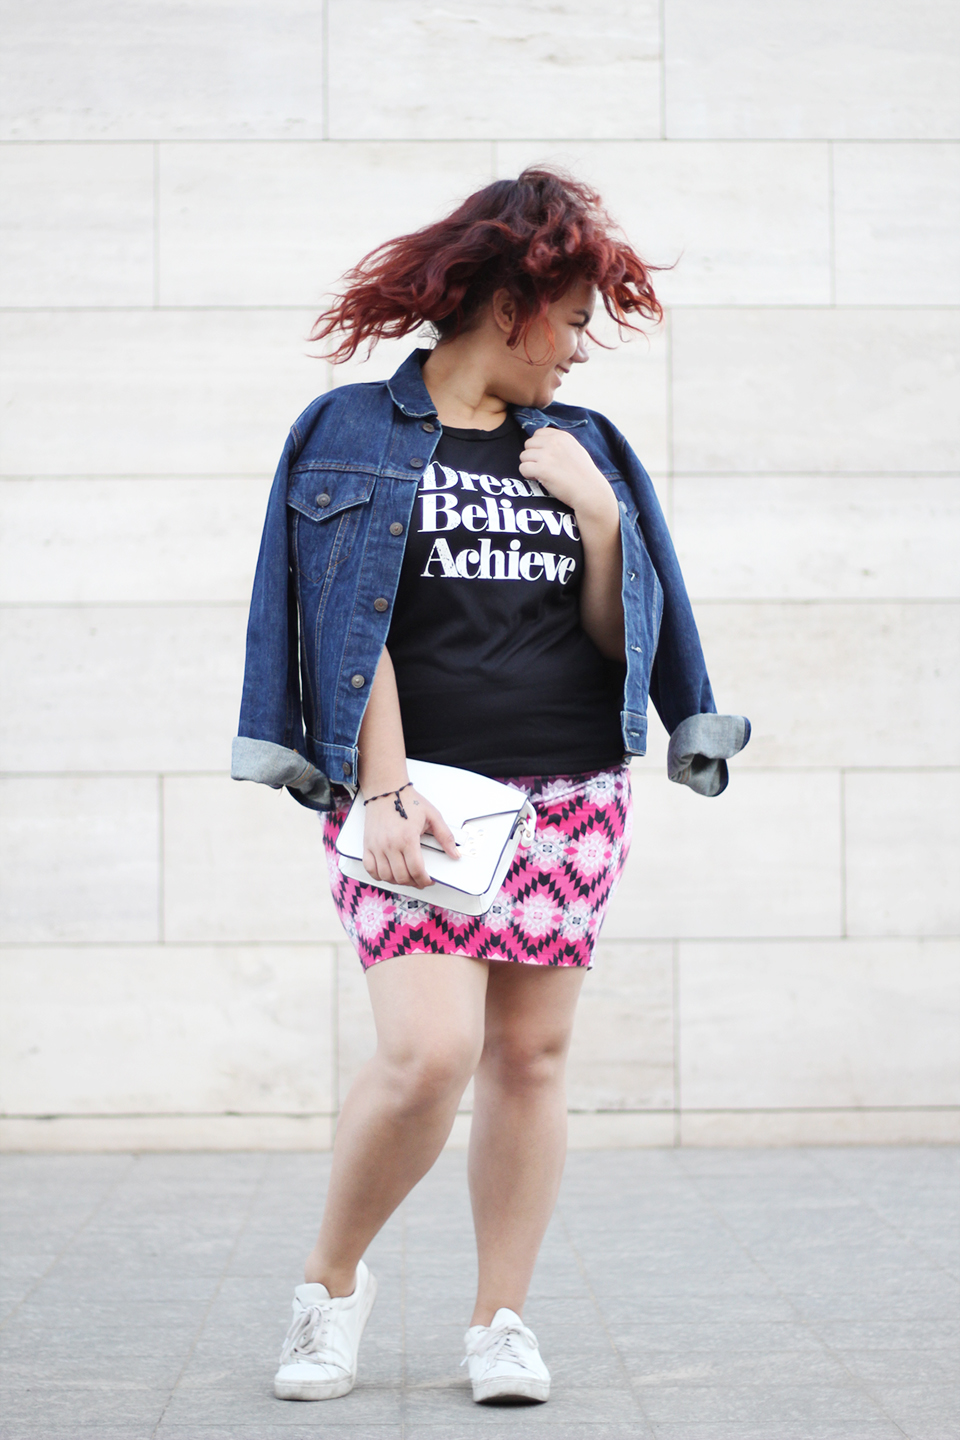 denim-over-the-shoulders-wolesalebuying-charlotte-russe-levis-denim-dream-sincerely-jules-shirt-dream-believe-achieve-blogger-mexicana-curvy-girl-summer-fall-river-island-sneakers-fashion-blogger